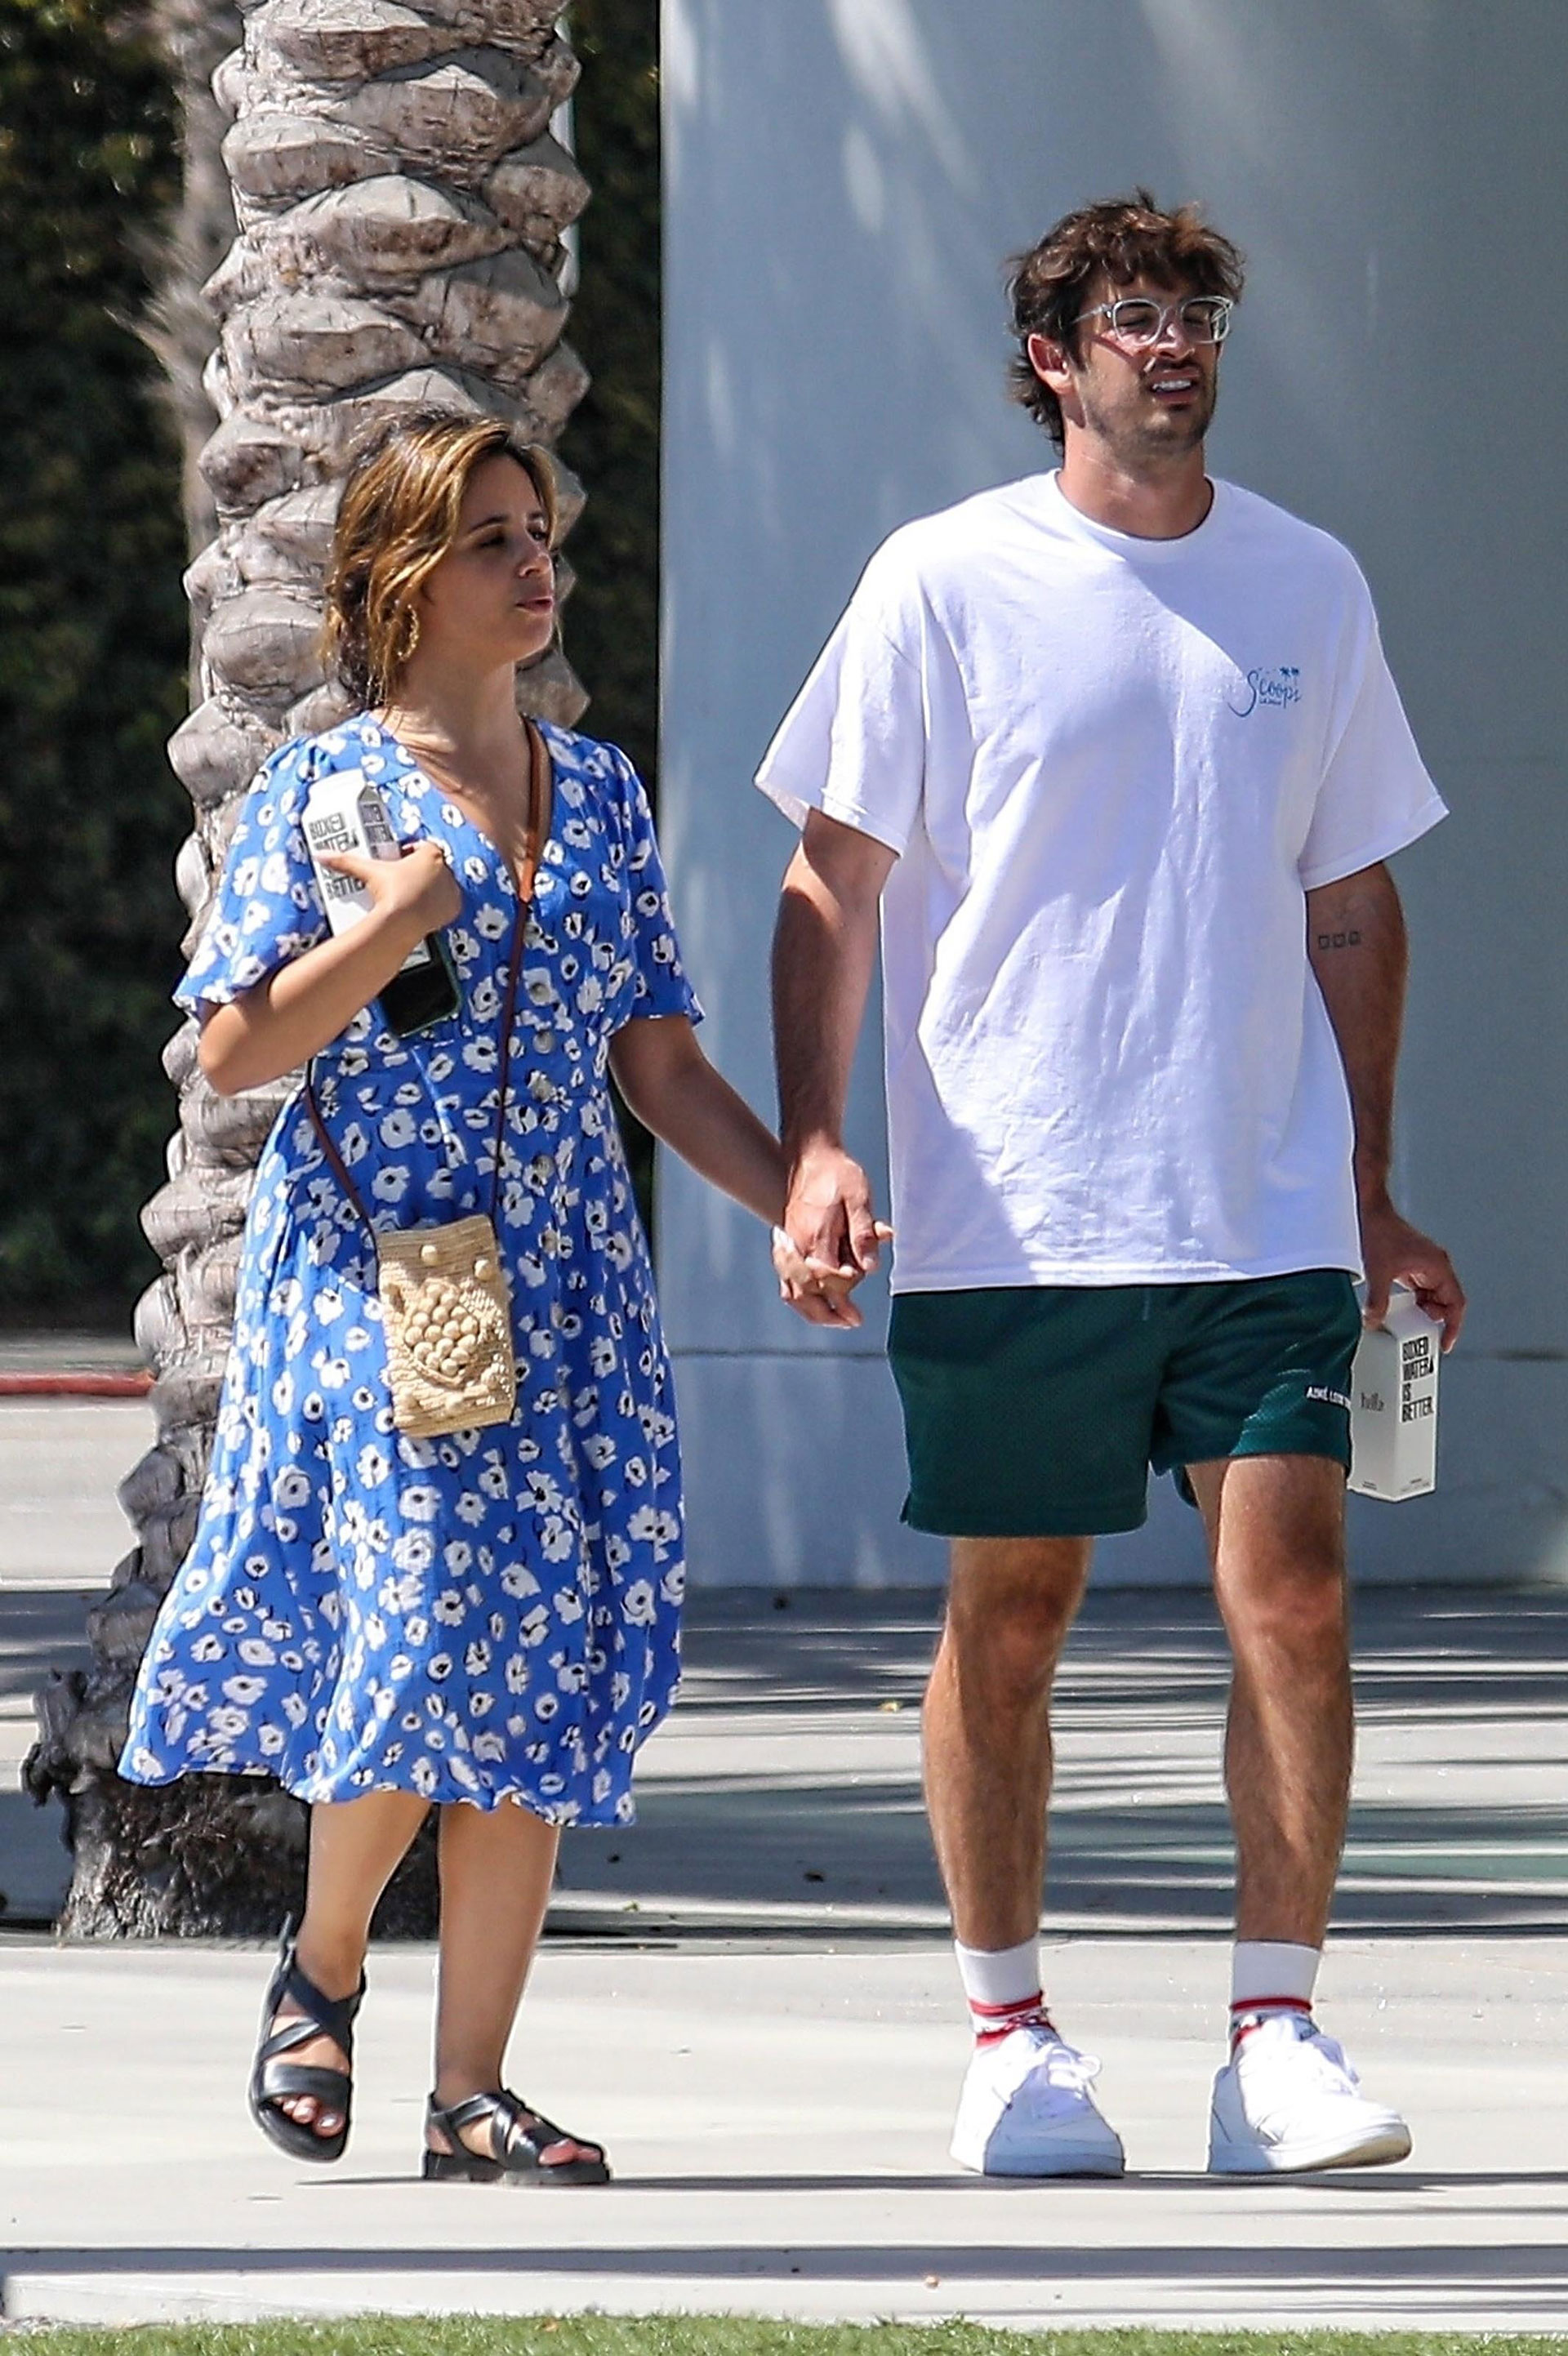 Brand new couple walking the streets of Los Angeles holding hands after breakfast